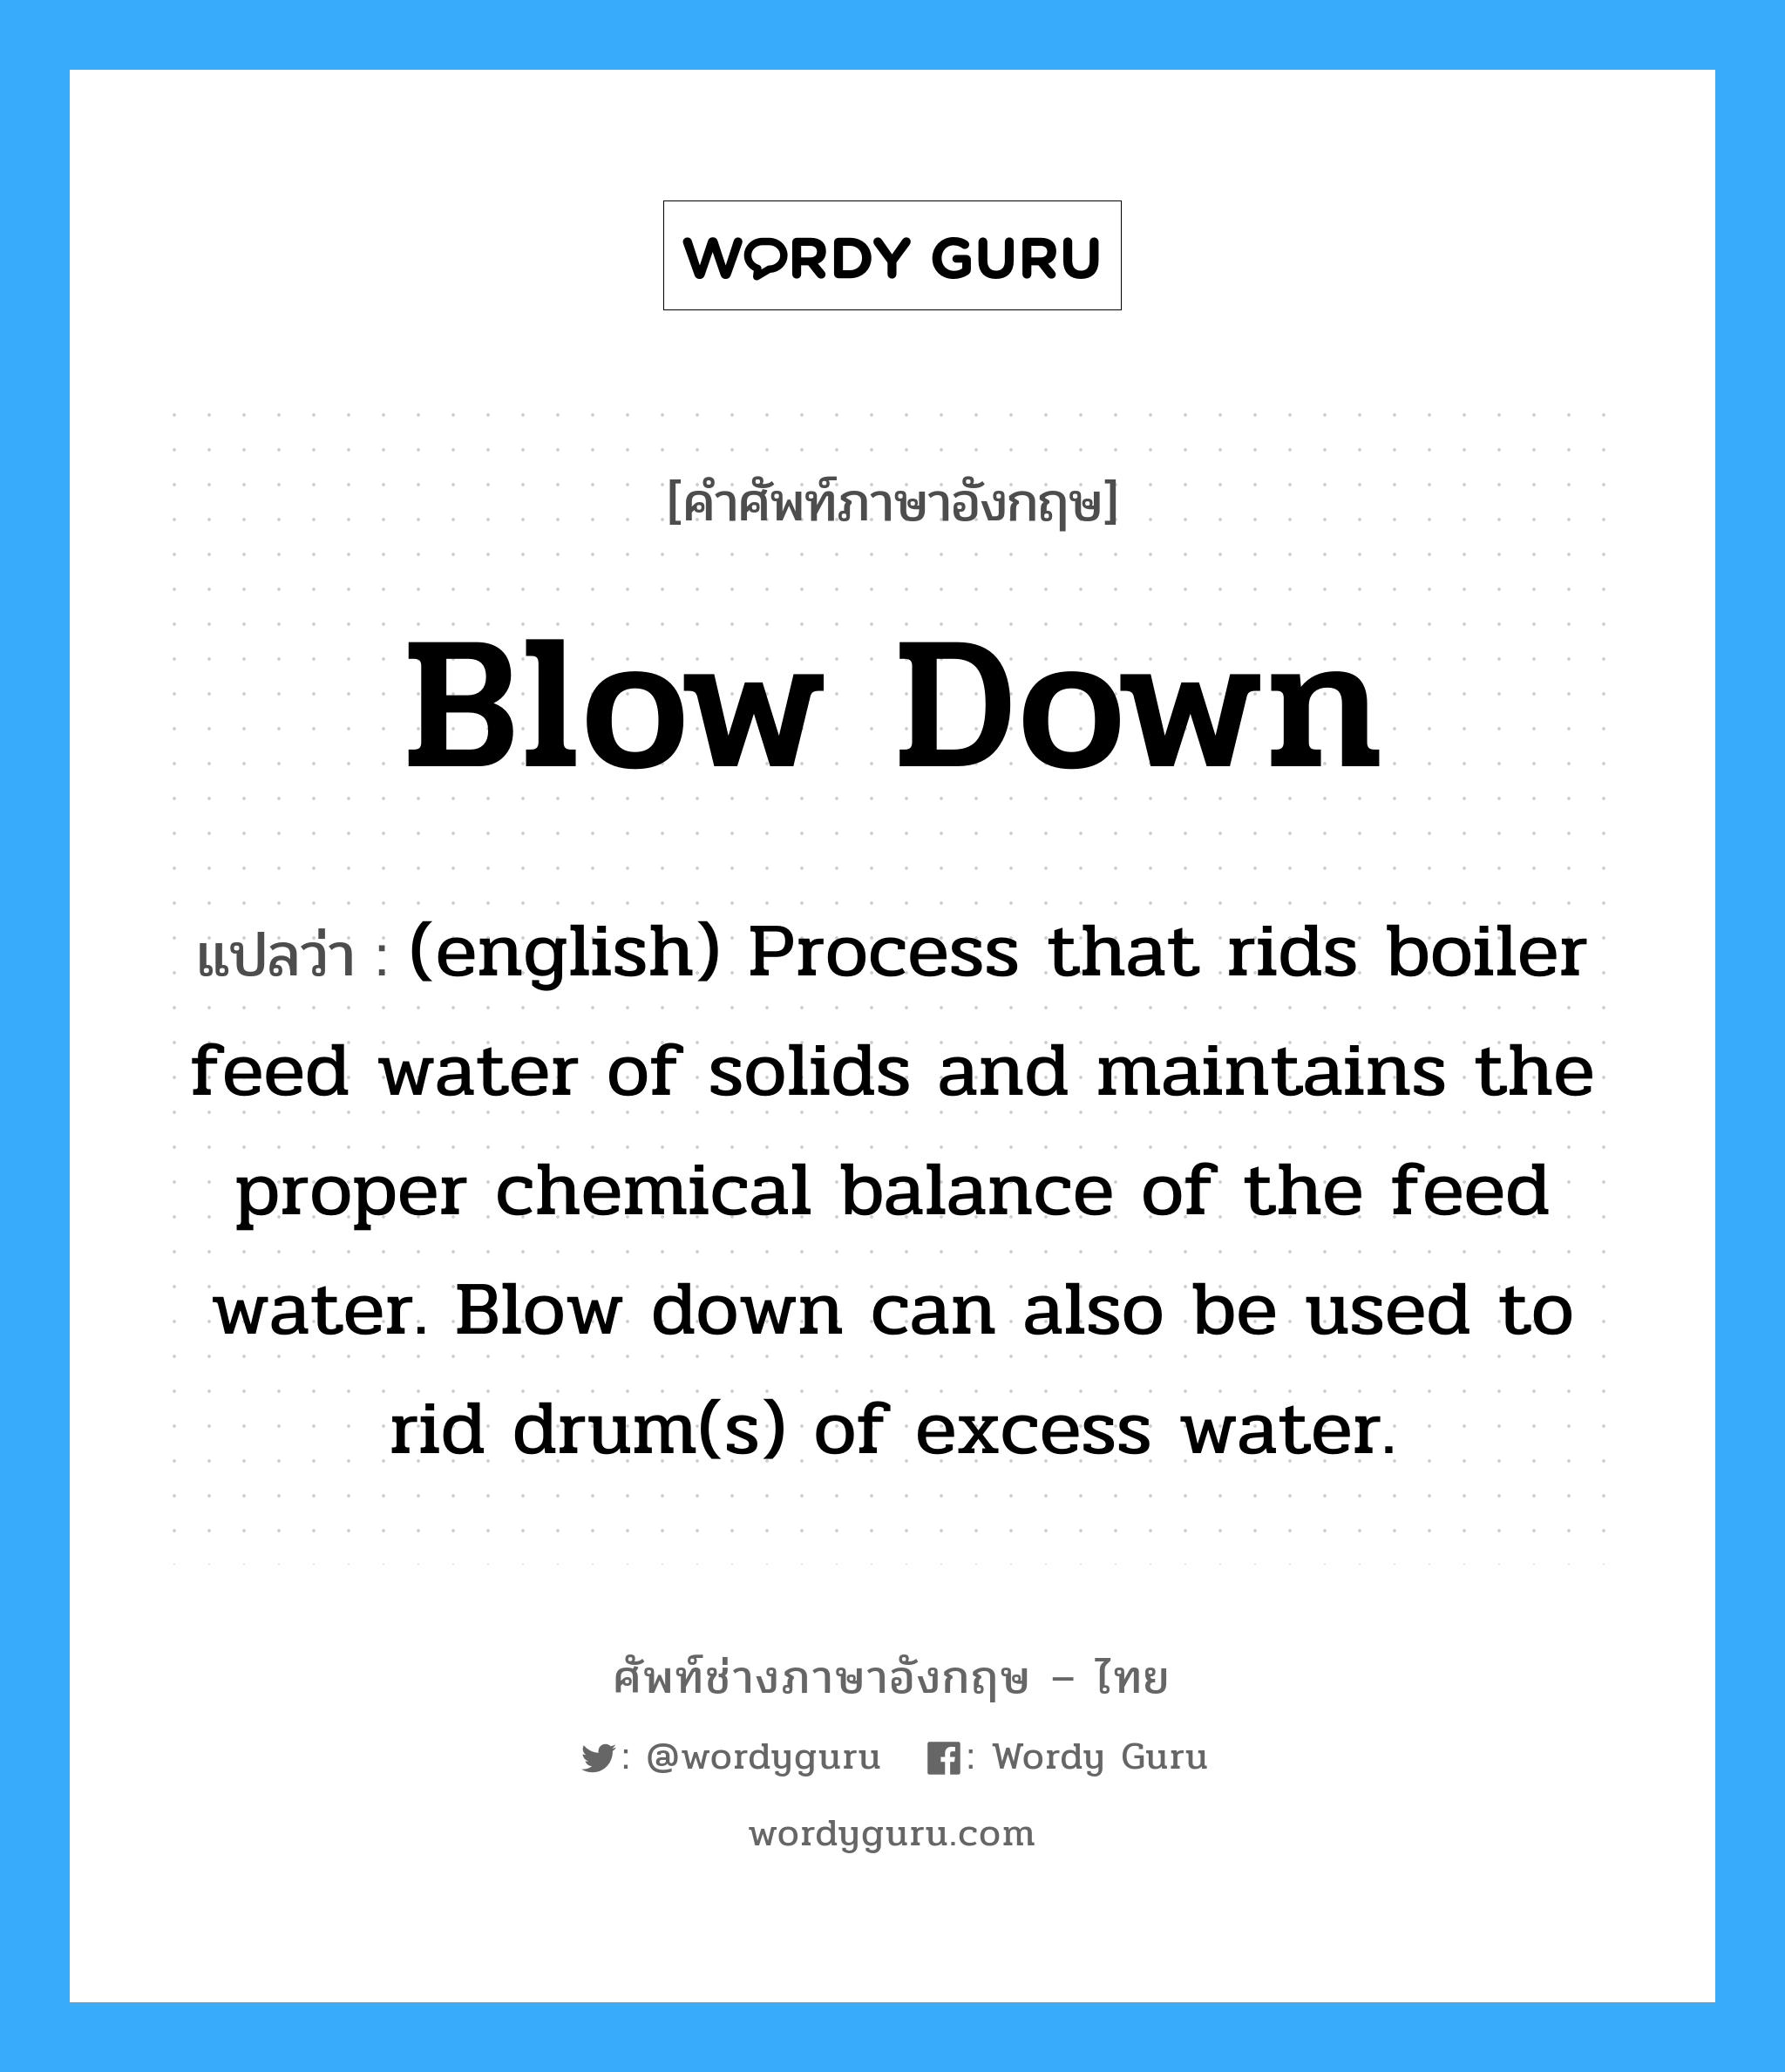 Blow Down แปลว่า?, คำศัพท์ช่างภาษาอังกฤษ - ไทย Blow Down คำศัพท์ภาษาอังกฤษ Blow Down แปลว่า (english) Process that rids boiler feed water of solids and maintains the proper chemical balance of the feed water. Blow down can also be used to rid drum(s) of excess water.